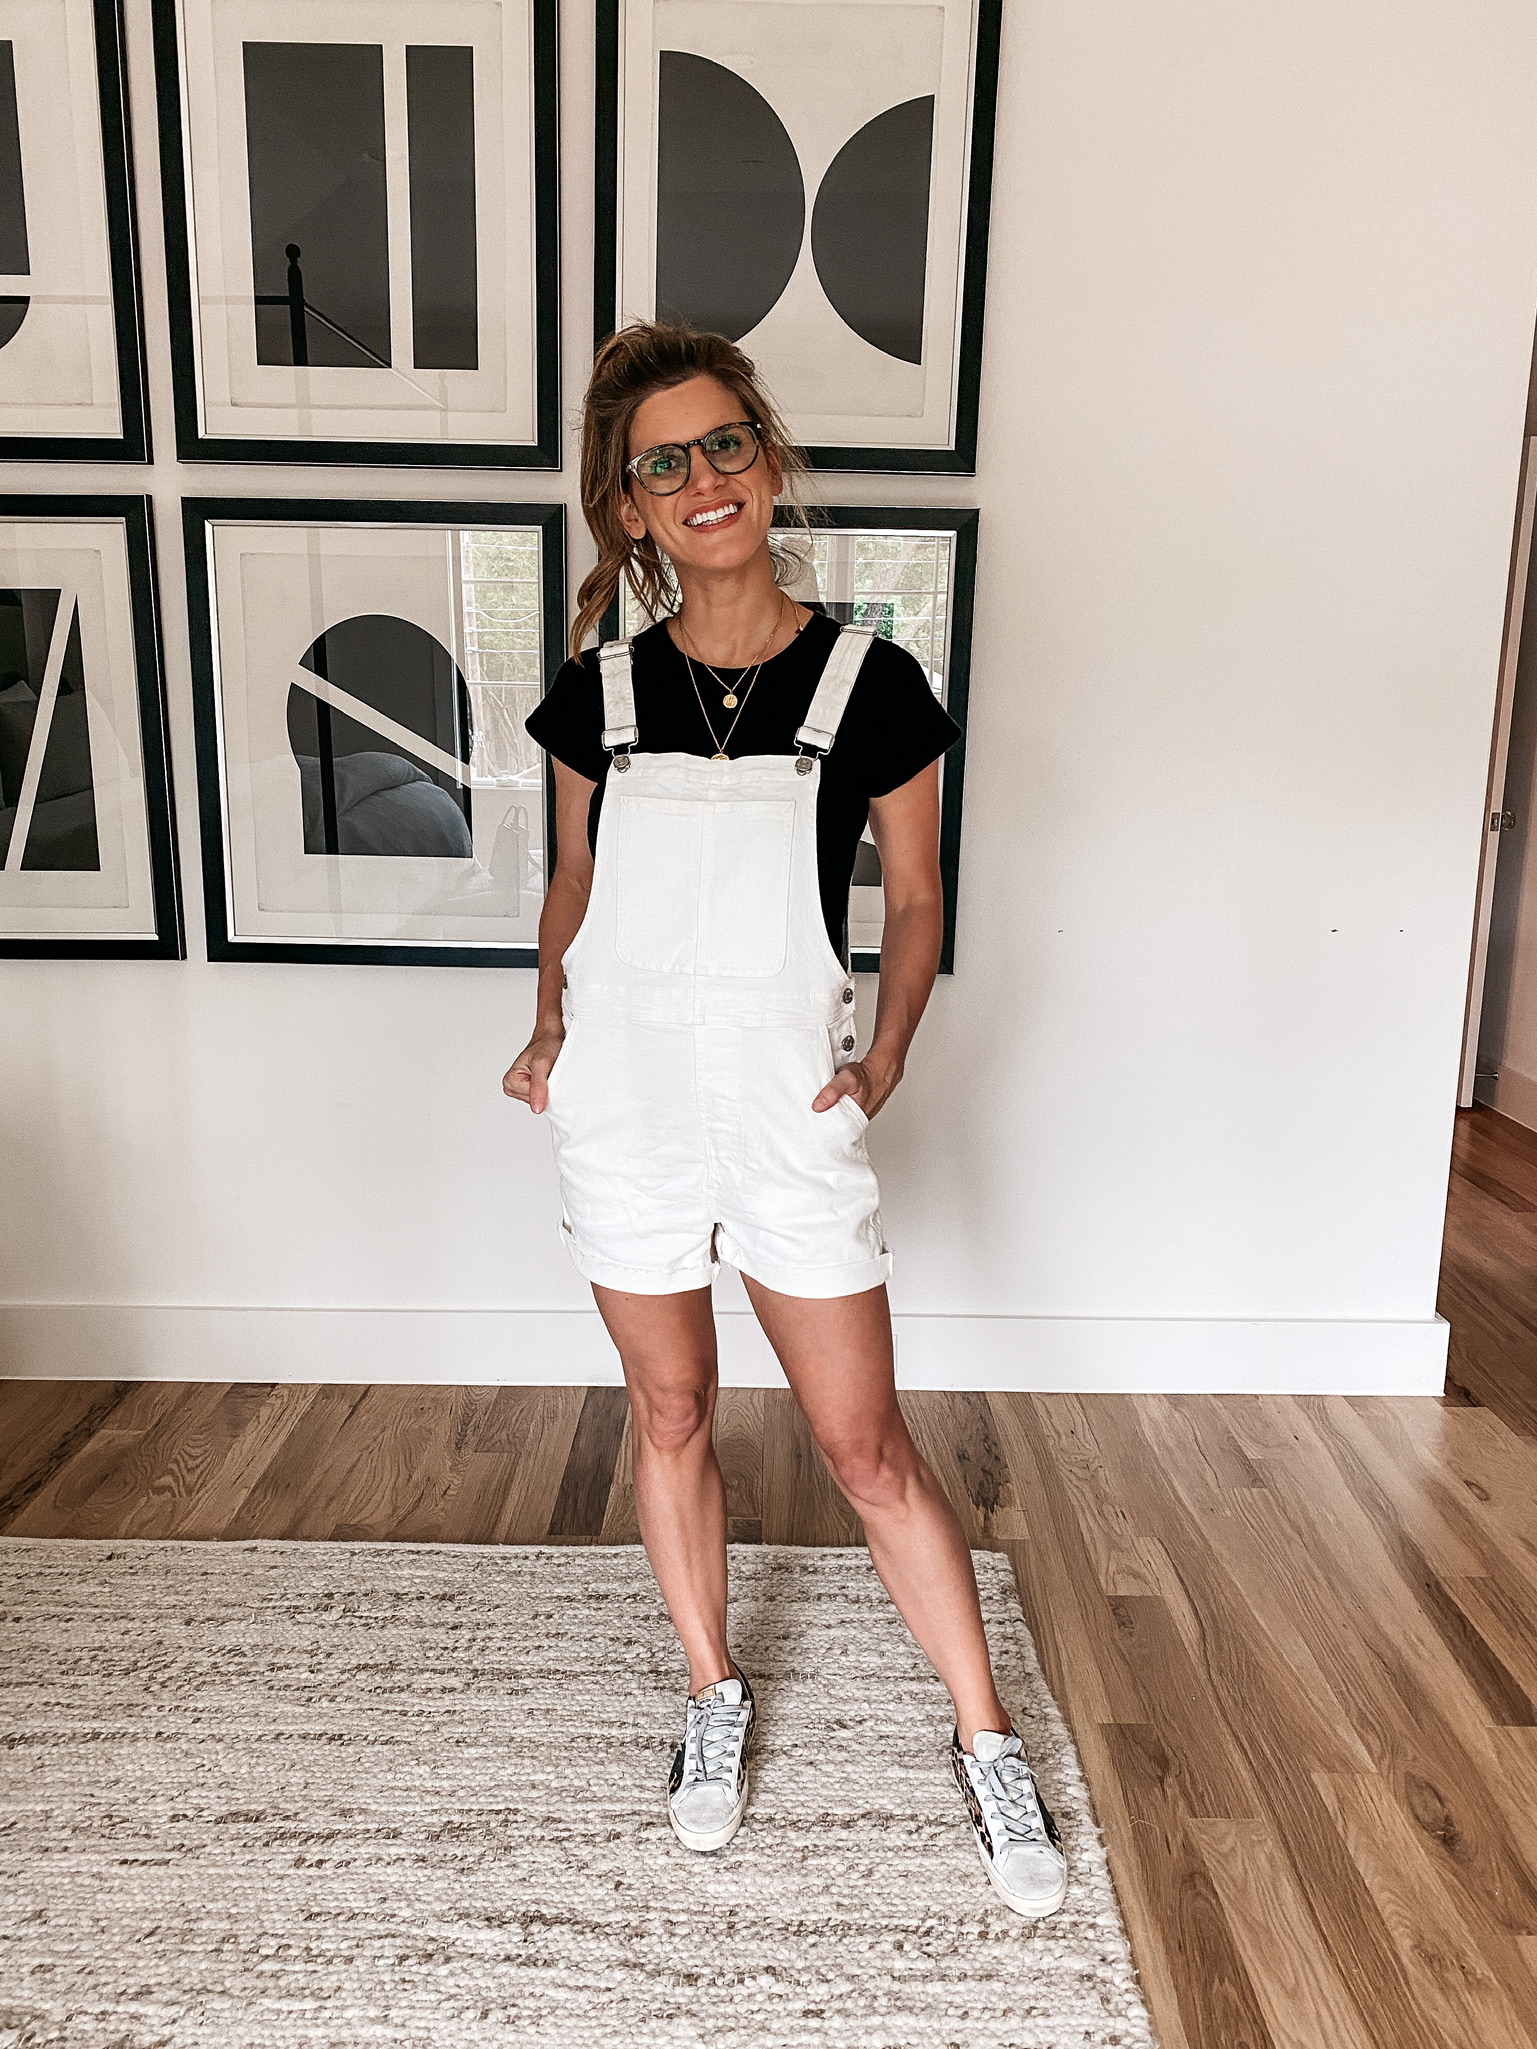 Brighton Butler wearing black tee and white overalls from madewell